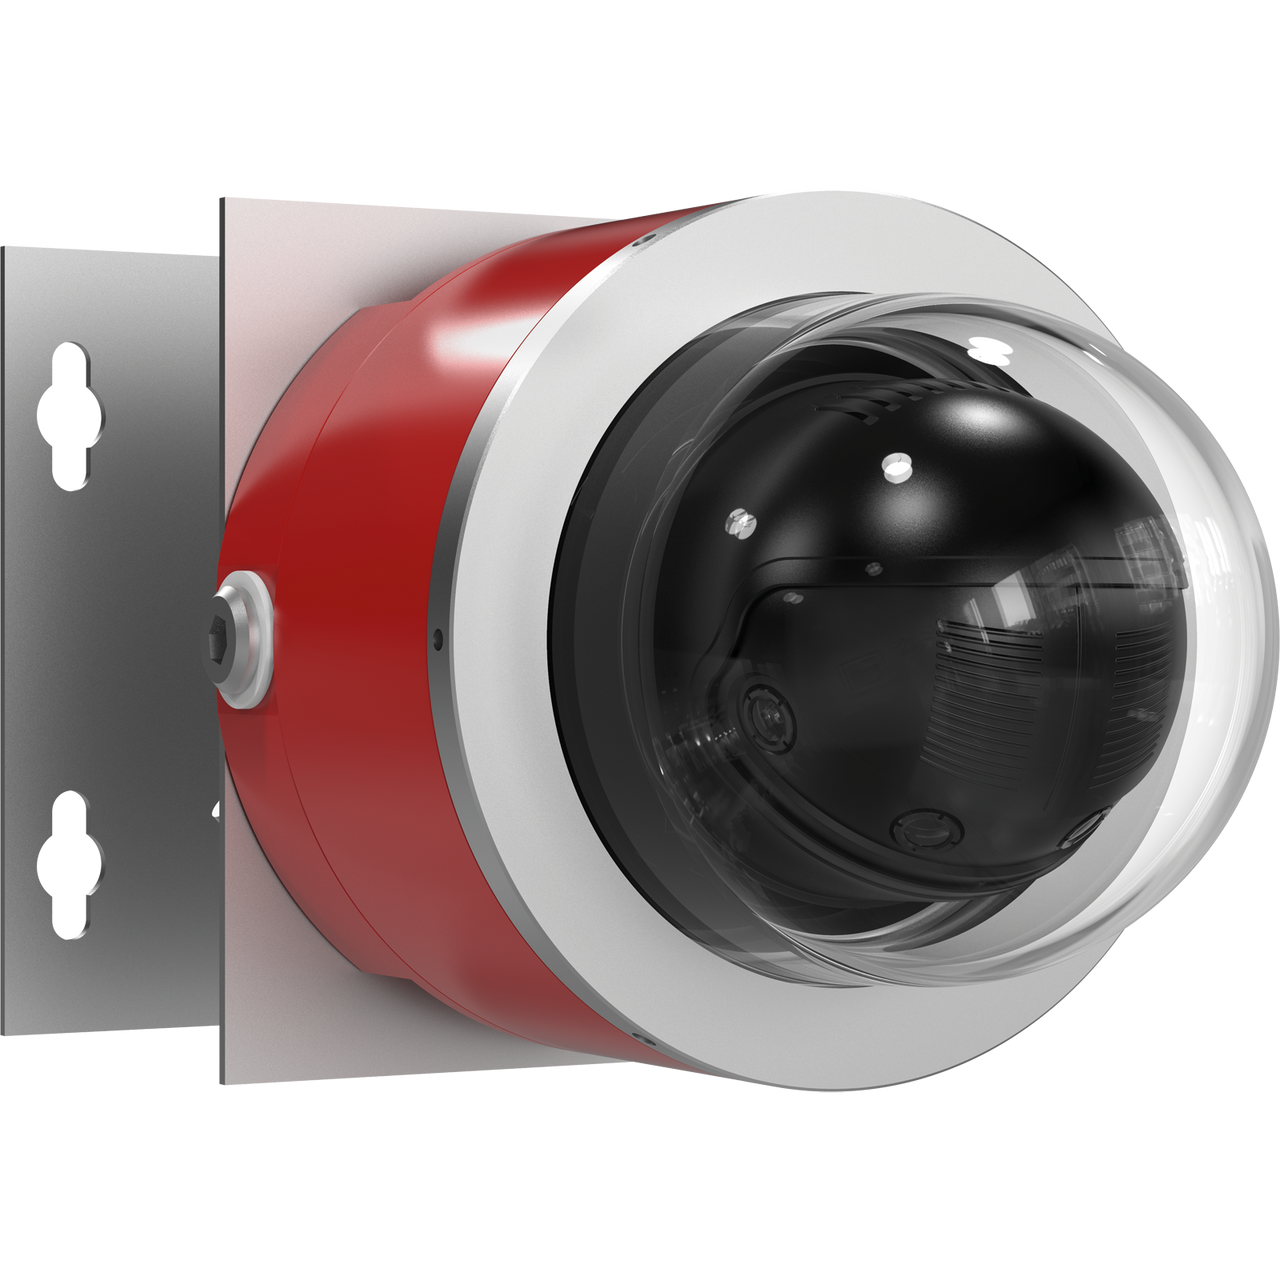 D101-A XF P3807 Explosion-Protected Network Camera